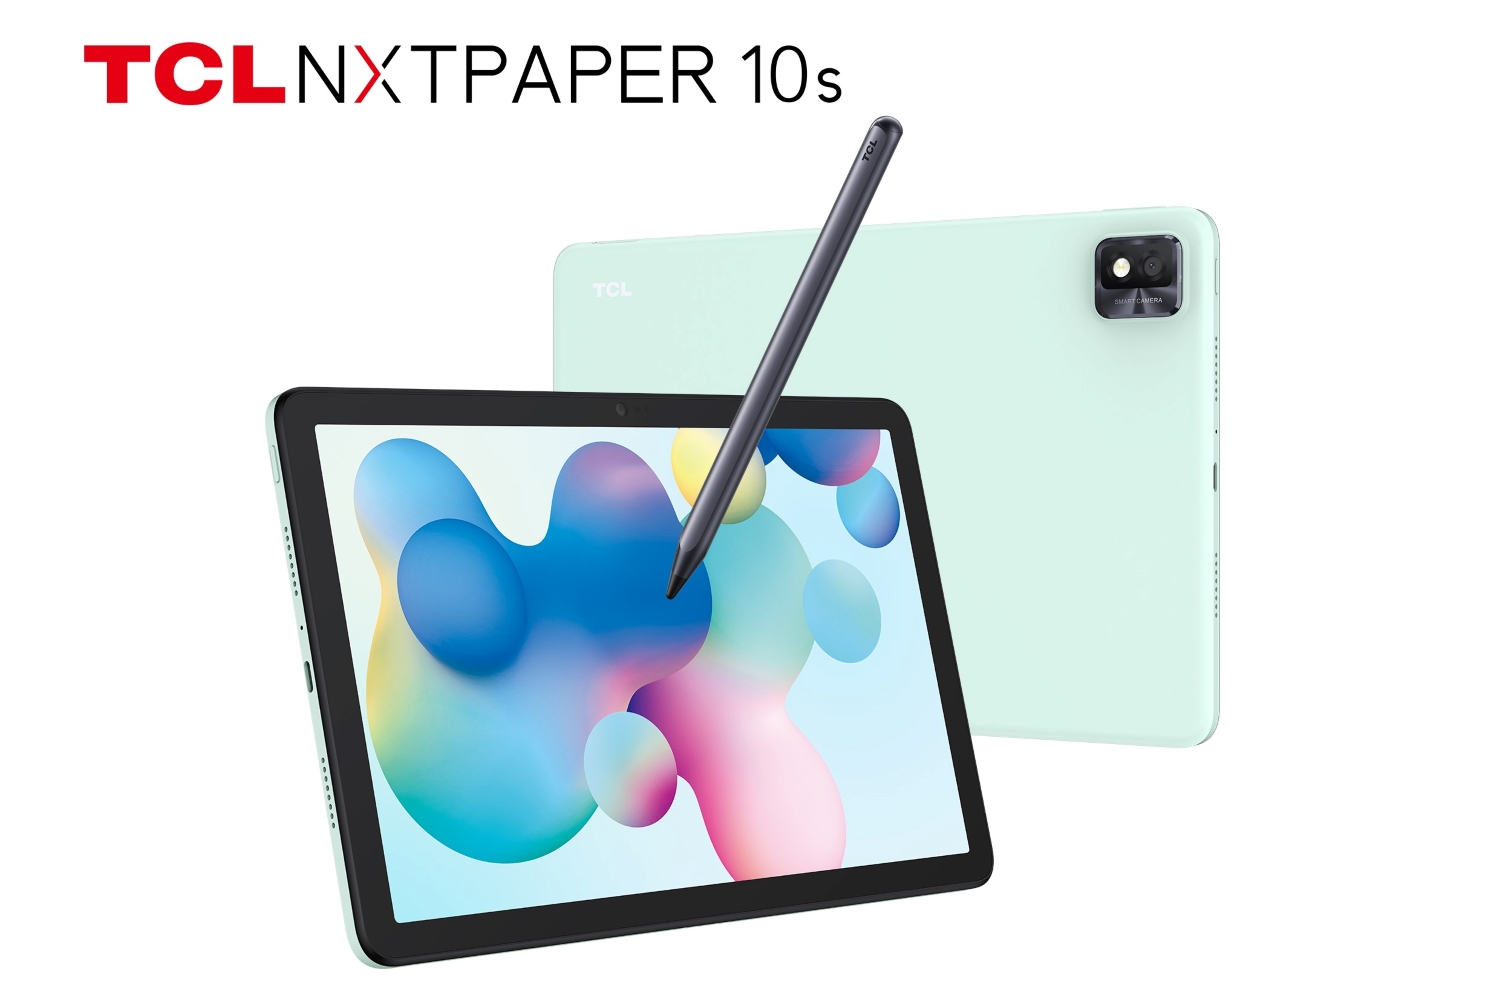 2023 TCL NXTPAPER PHONE GLOBAL LAUNCH